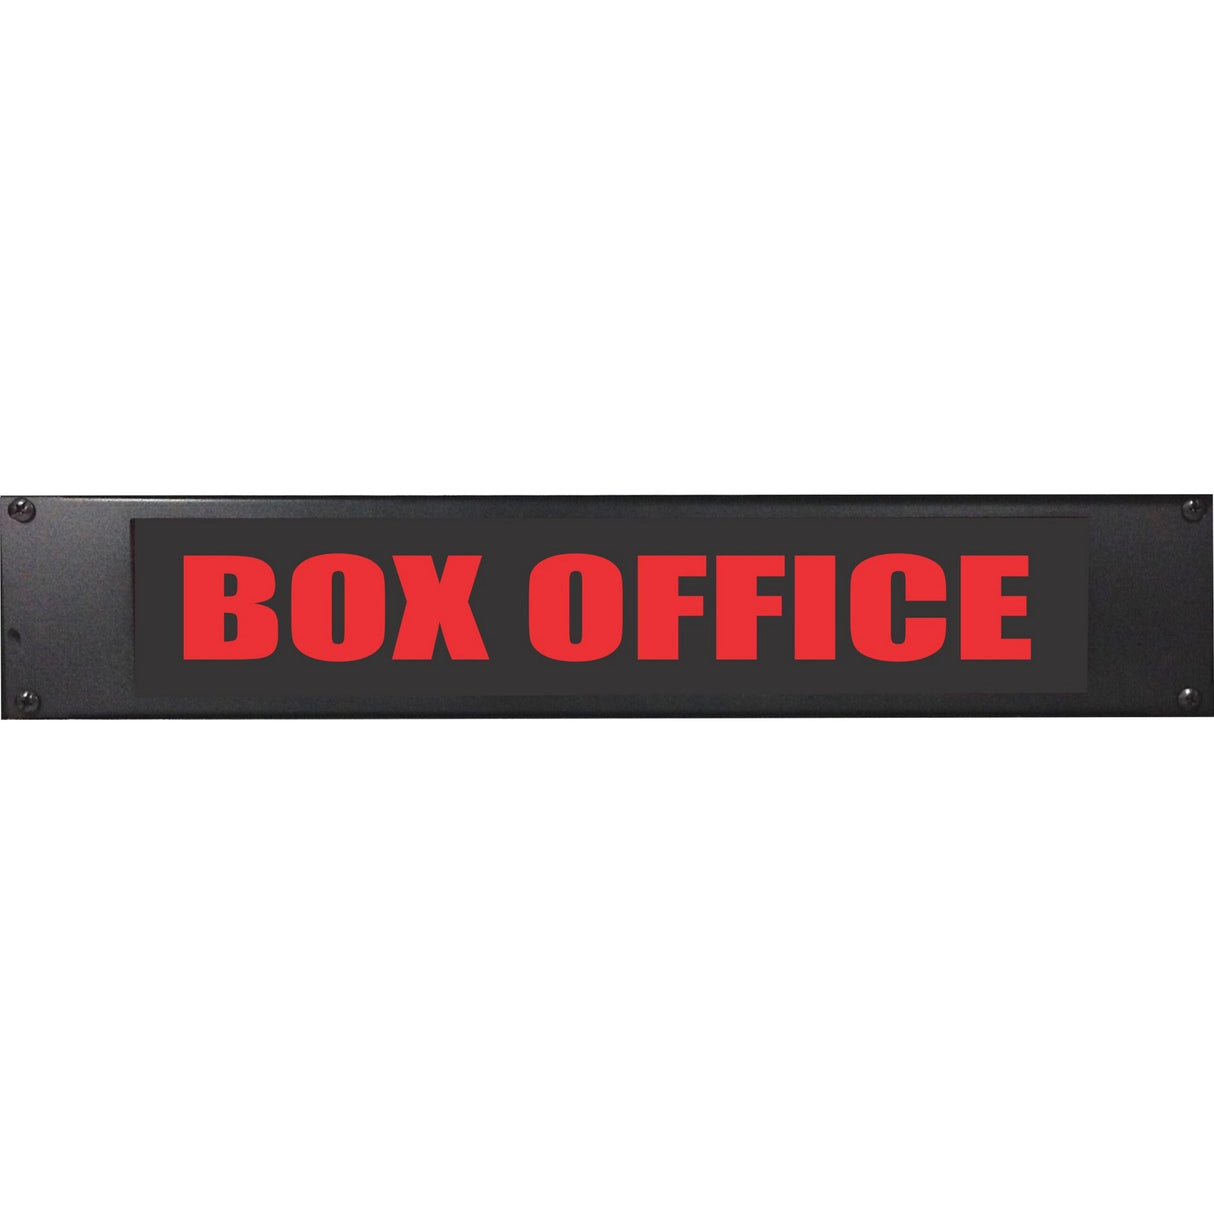 American Recorder OAS-4004RD "BOX OFFICE" 2U Rackmount LED Lighted Sign, Red